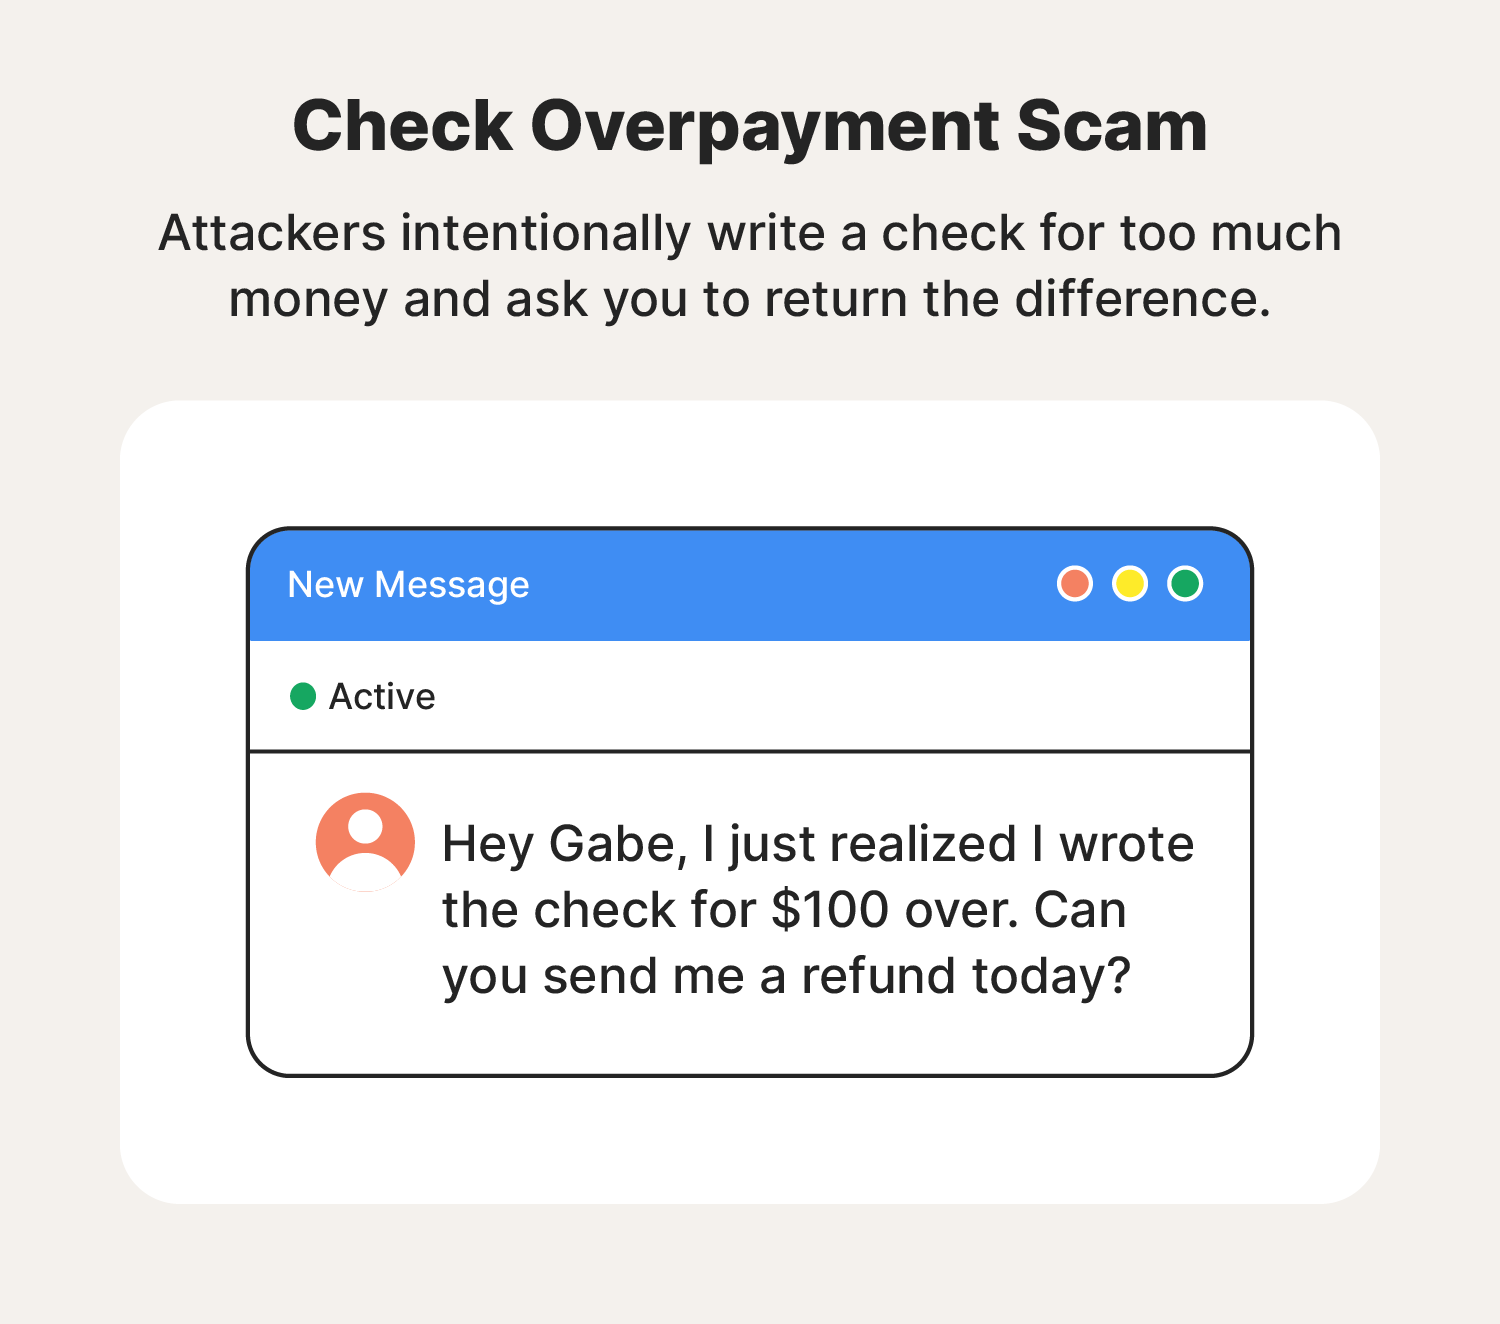 An example of a check overpayment scam message.